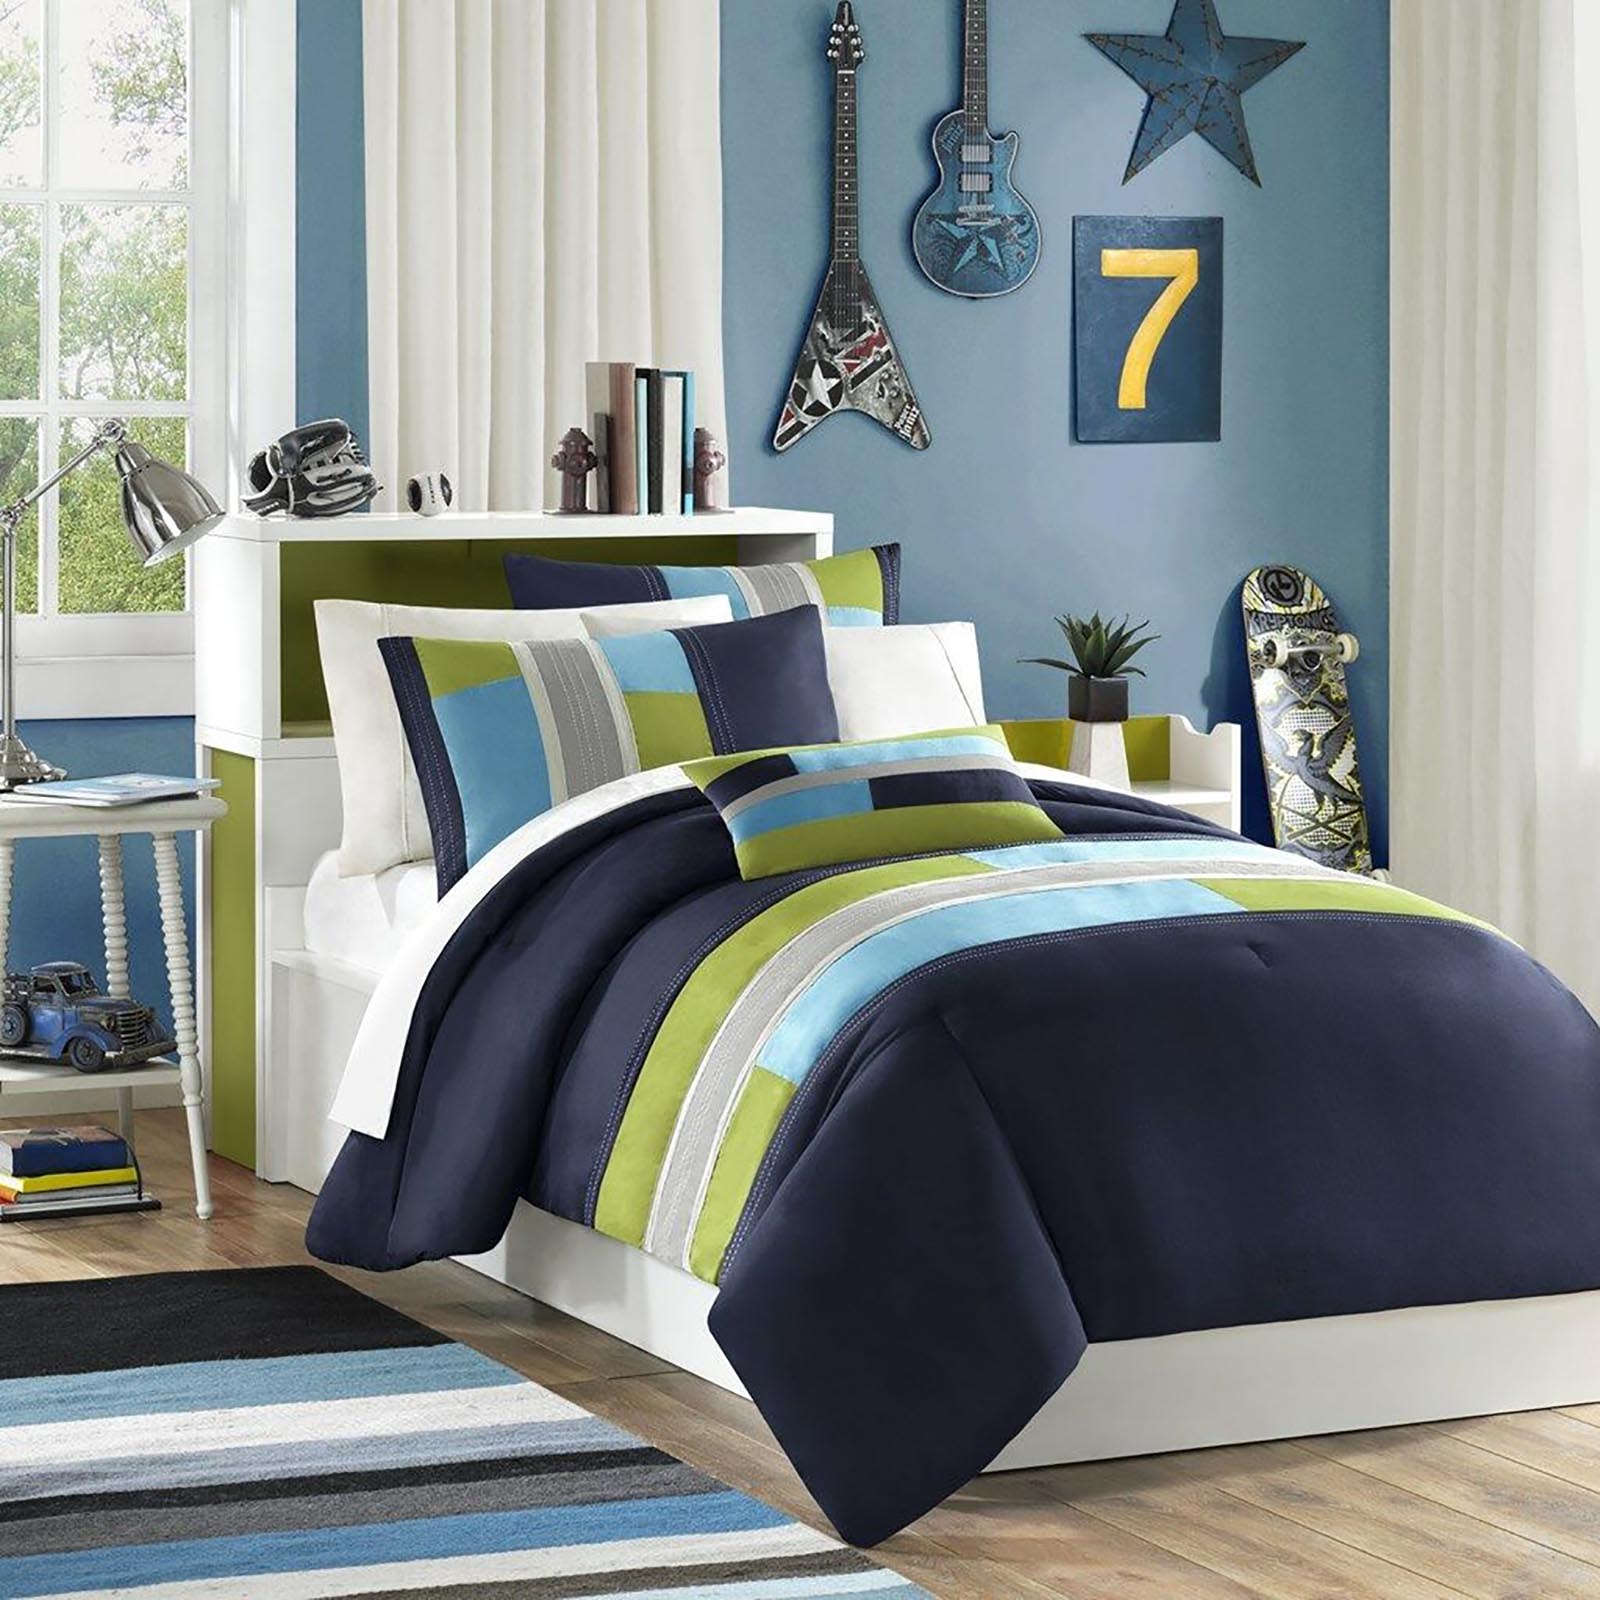 Striped King Comforter Set, Sears Bed In A Bag King